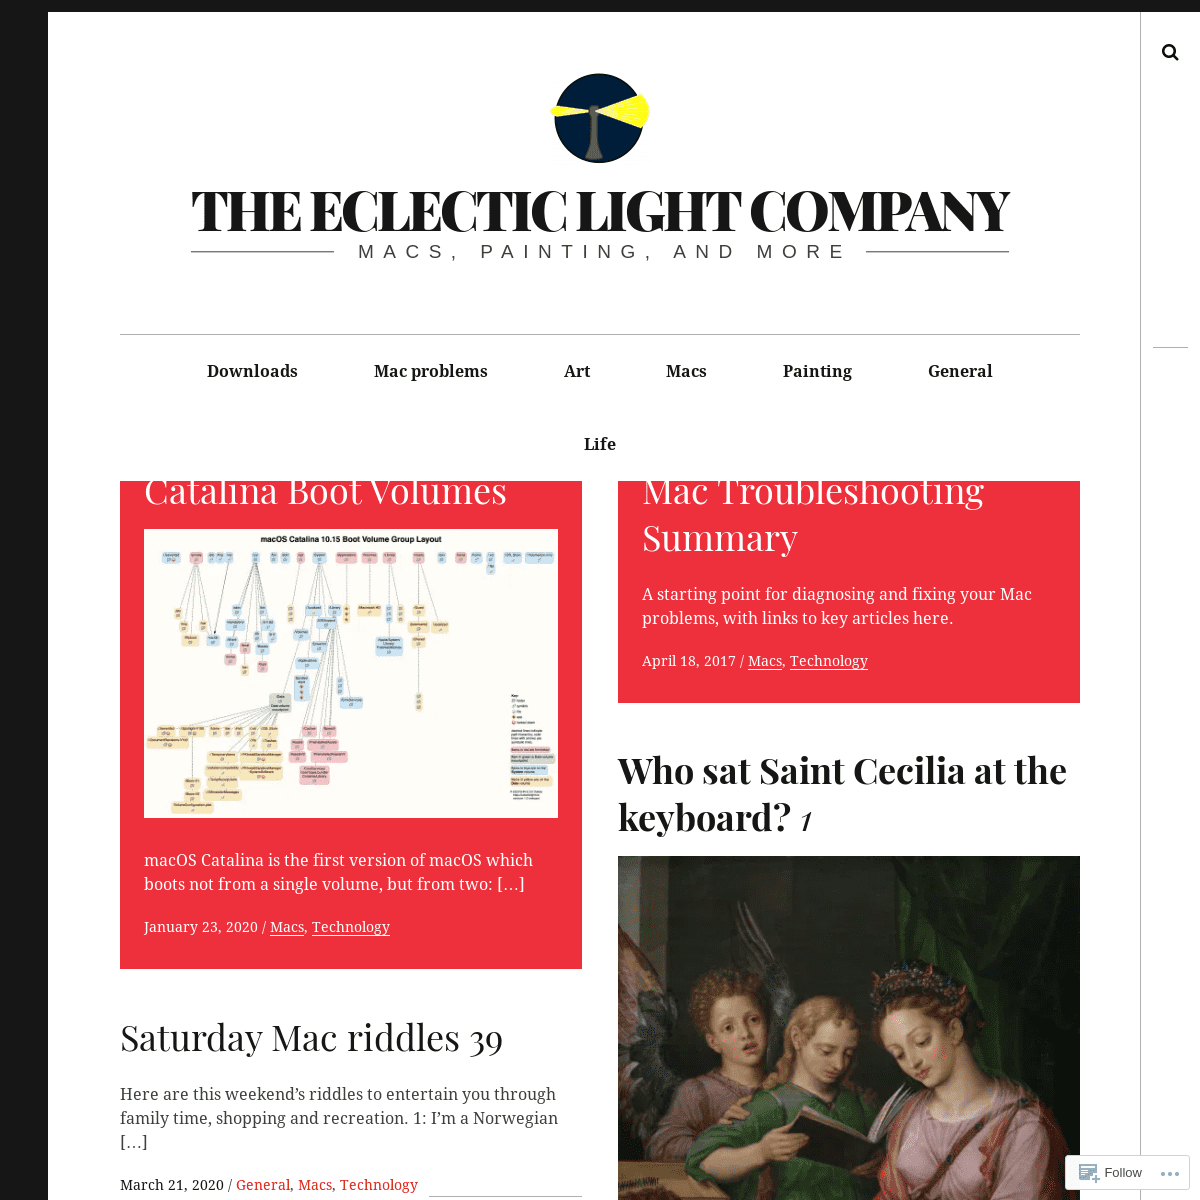 A complete backup of eclecticlight.co